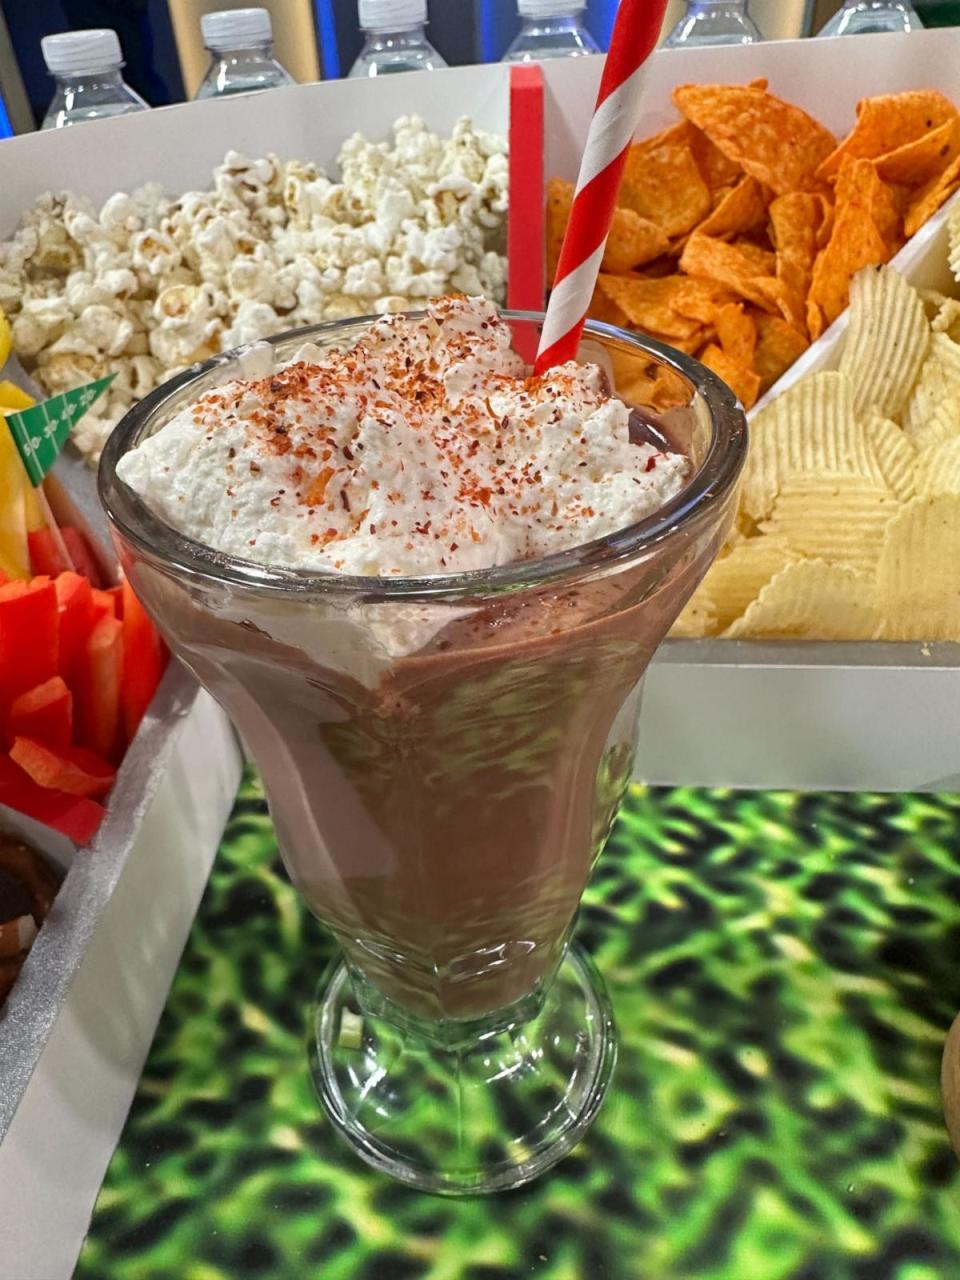 PHOTO: The Purdy chocolate shake made in the style of Mexican hot chocolate. (ABC News)